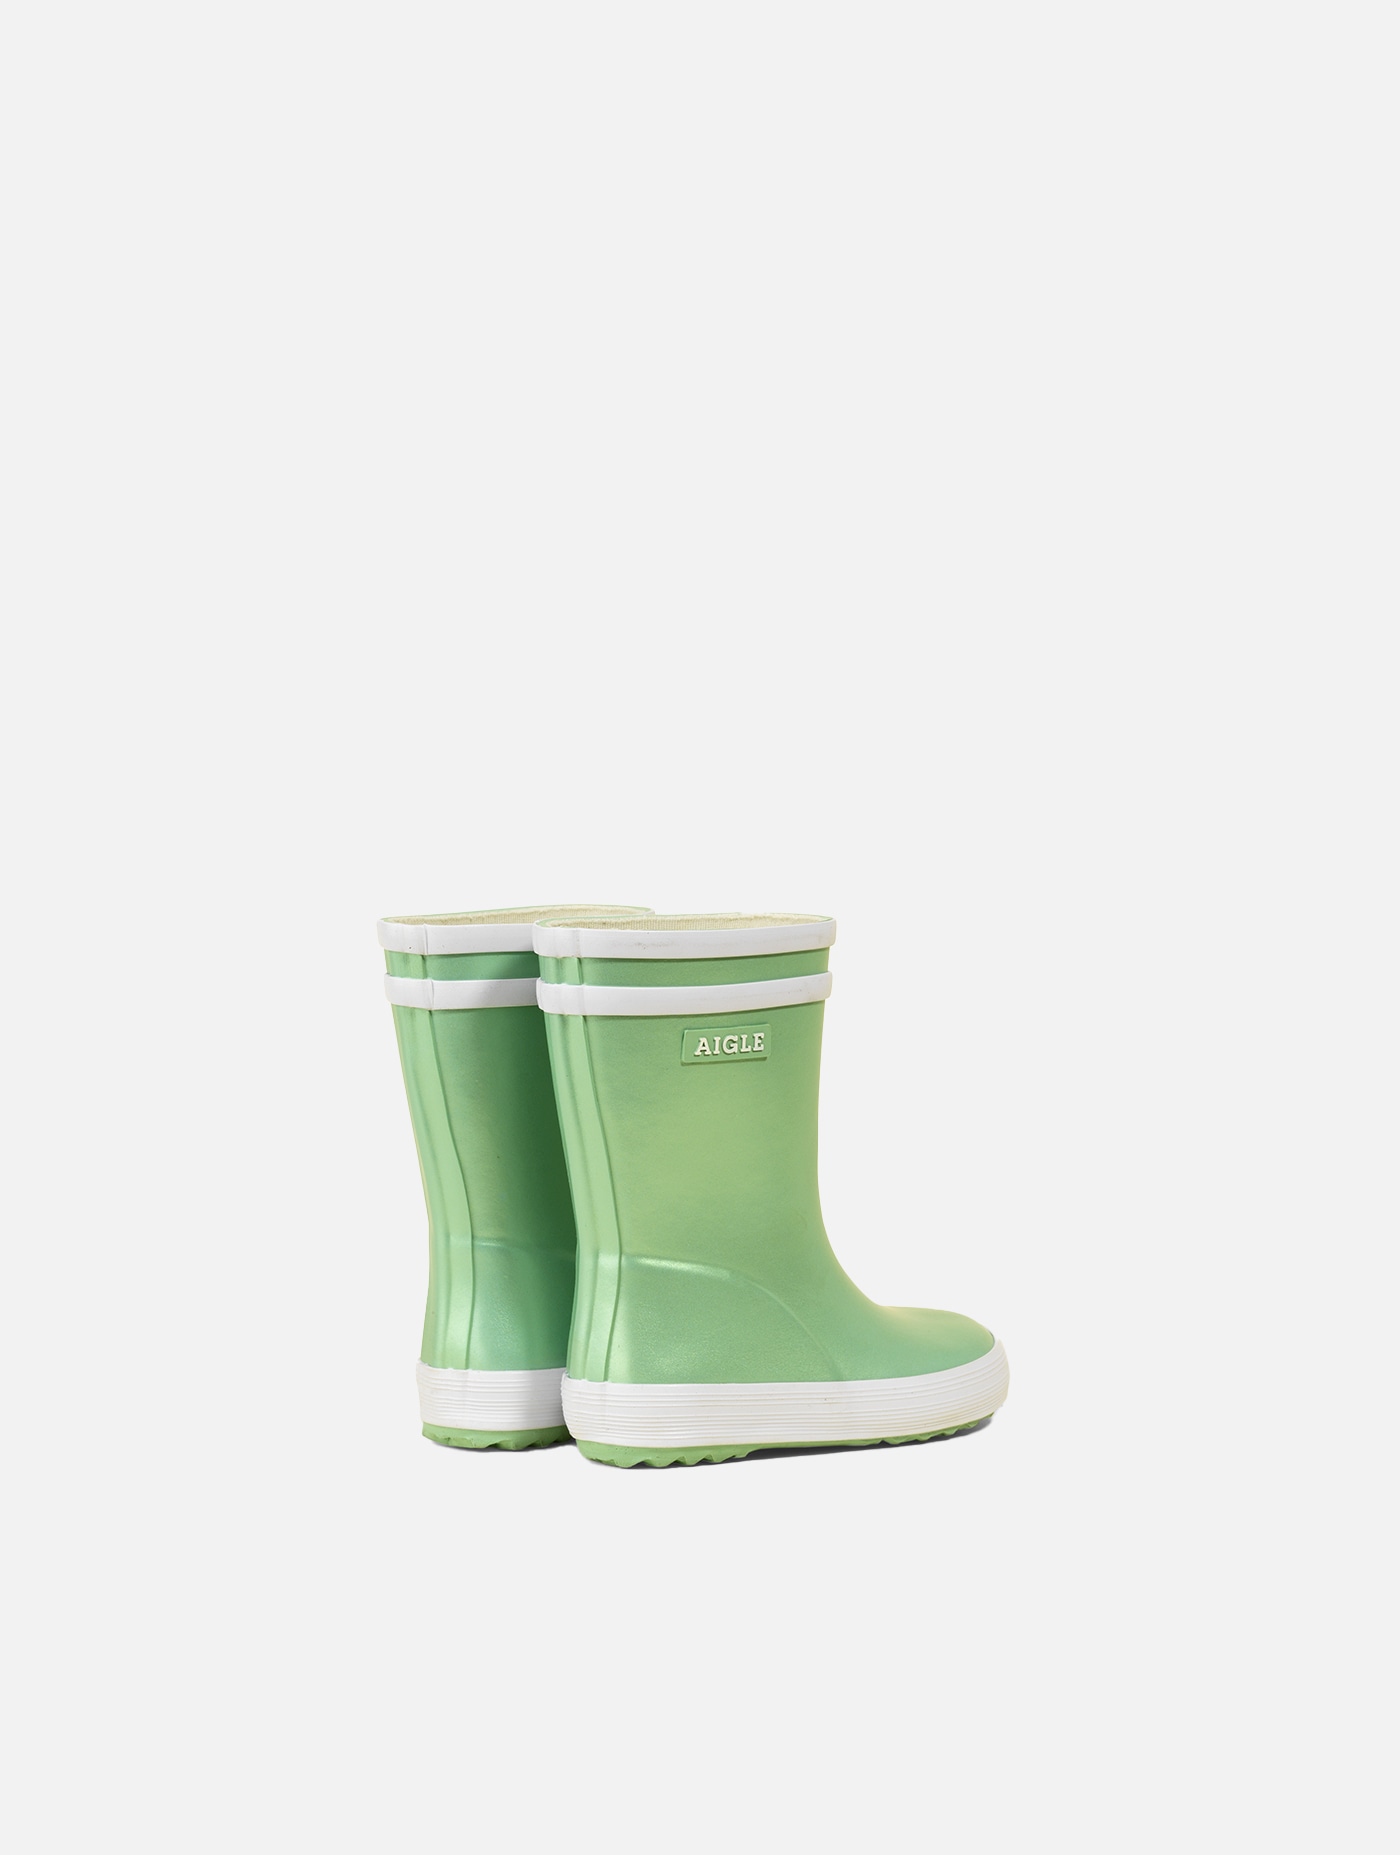 Aigle - The iridescent version of the iconic boot Scarabee - Baby flac | AIGLE